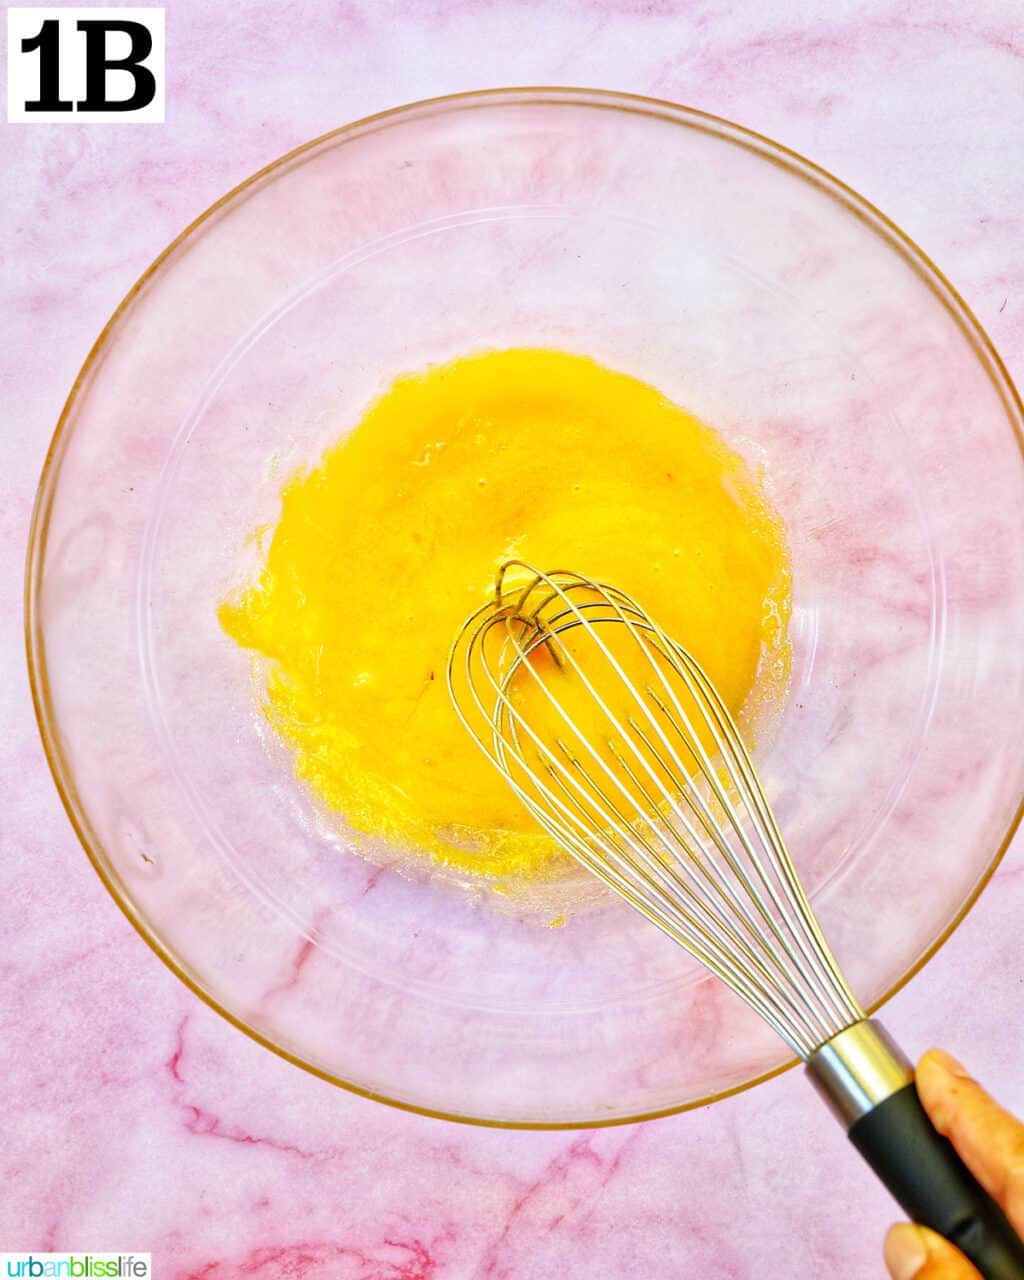 whisk beating egg yolks in a clear glass bowl.